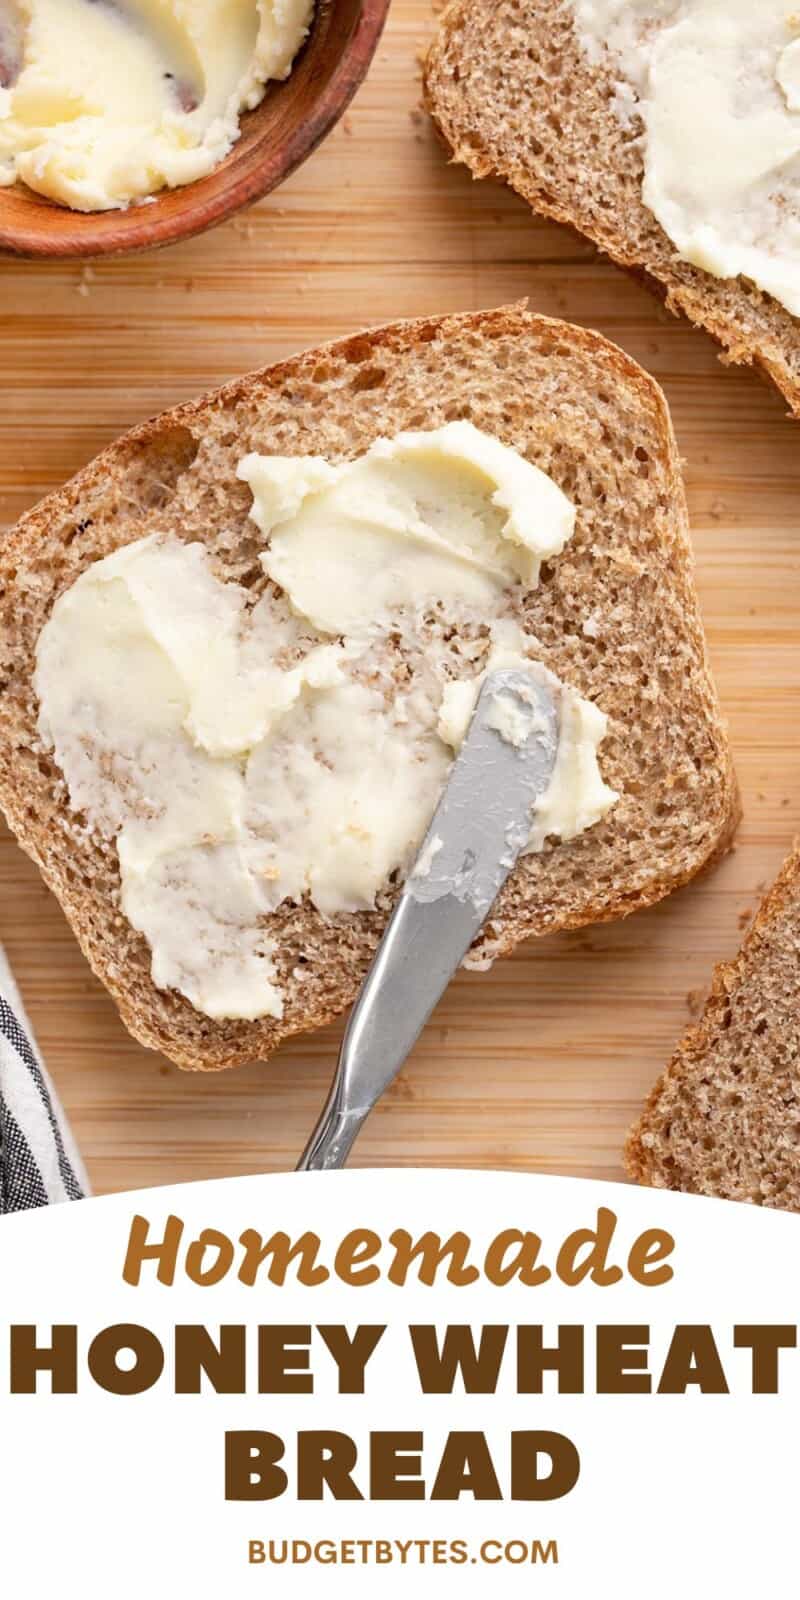 Overhead view of slices of honey wheat bread being smeared with butter.